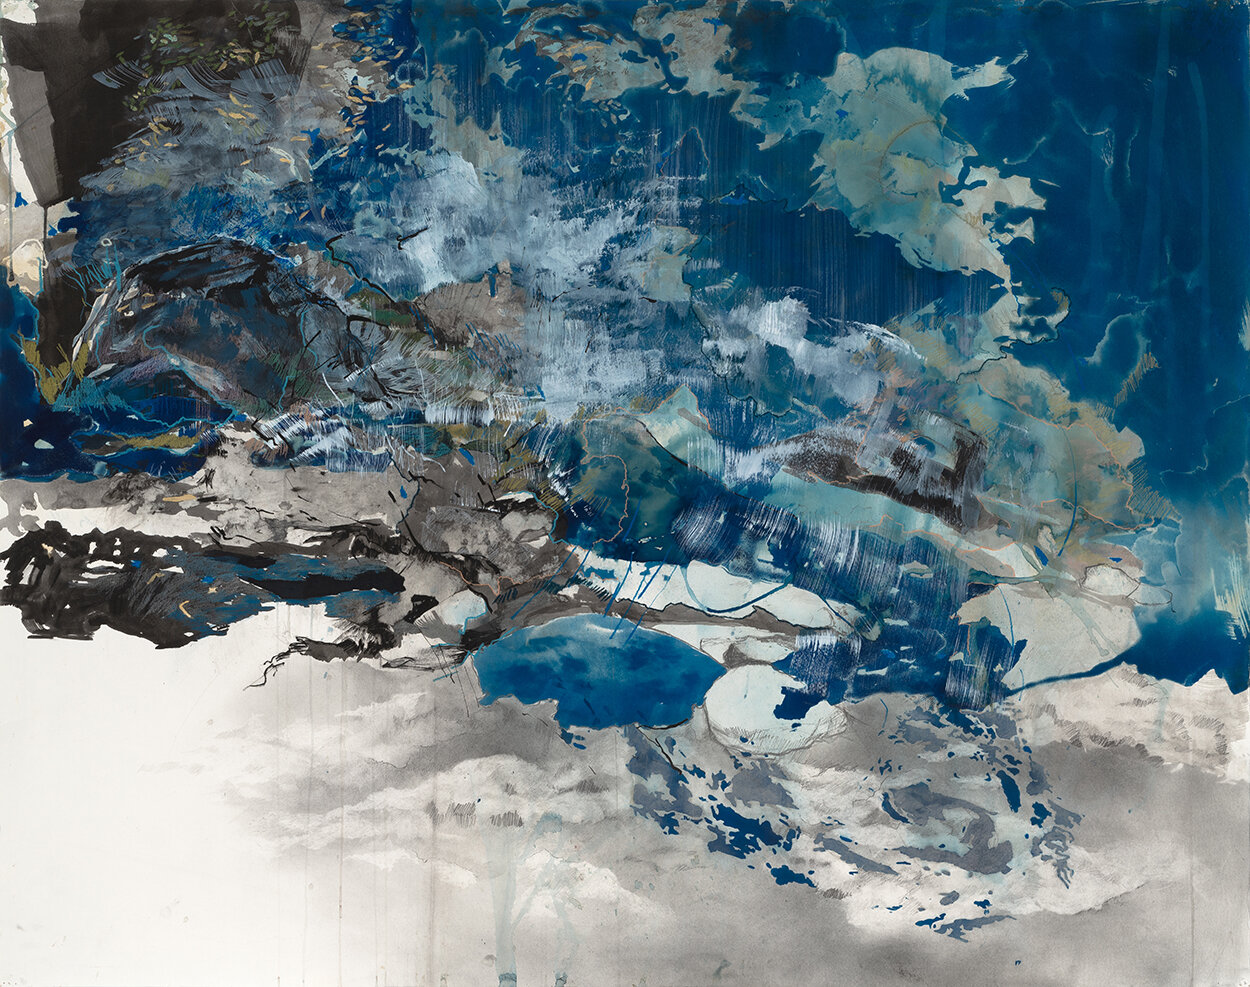  Holding Water  2019, 35.5 x 45.5", cyanotype and mixed media on paper 